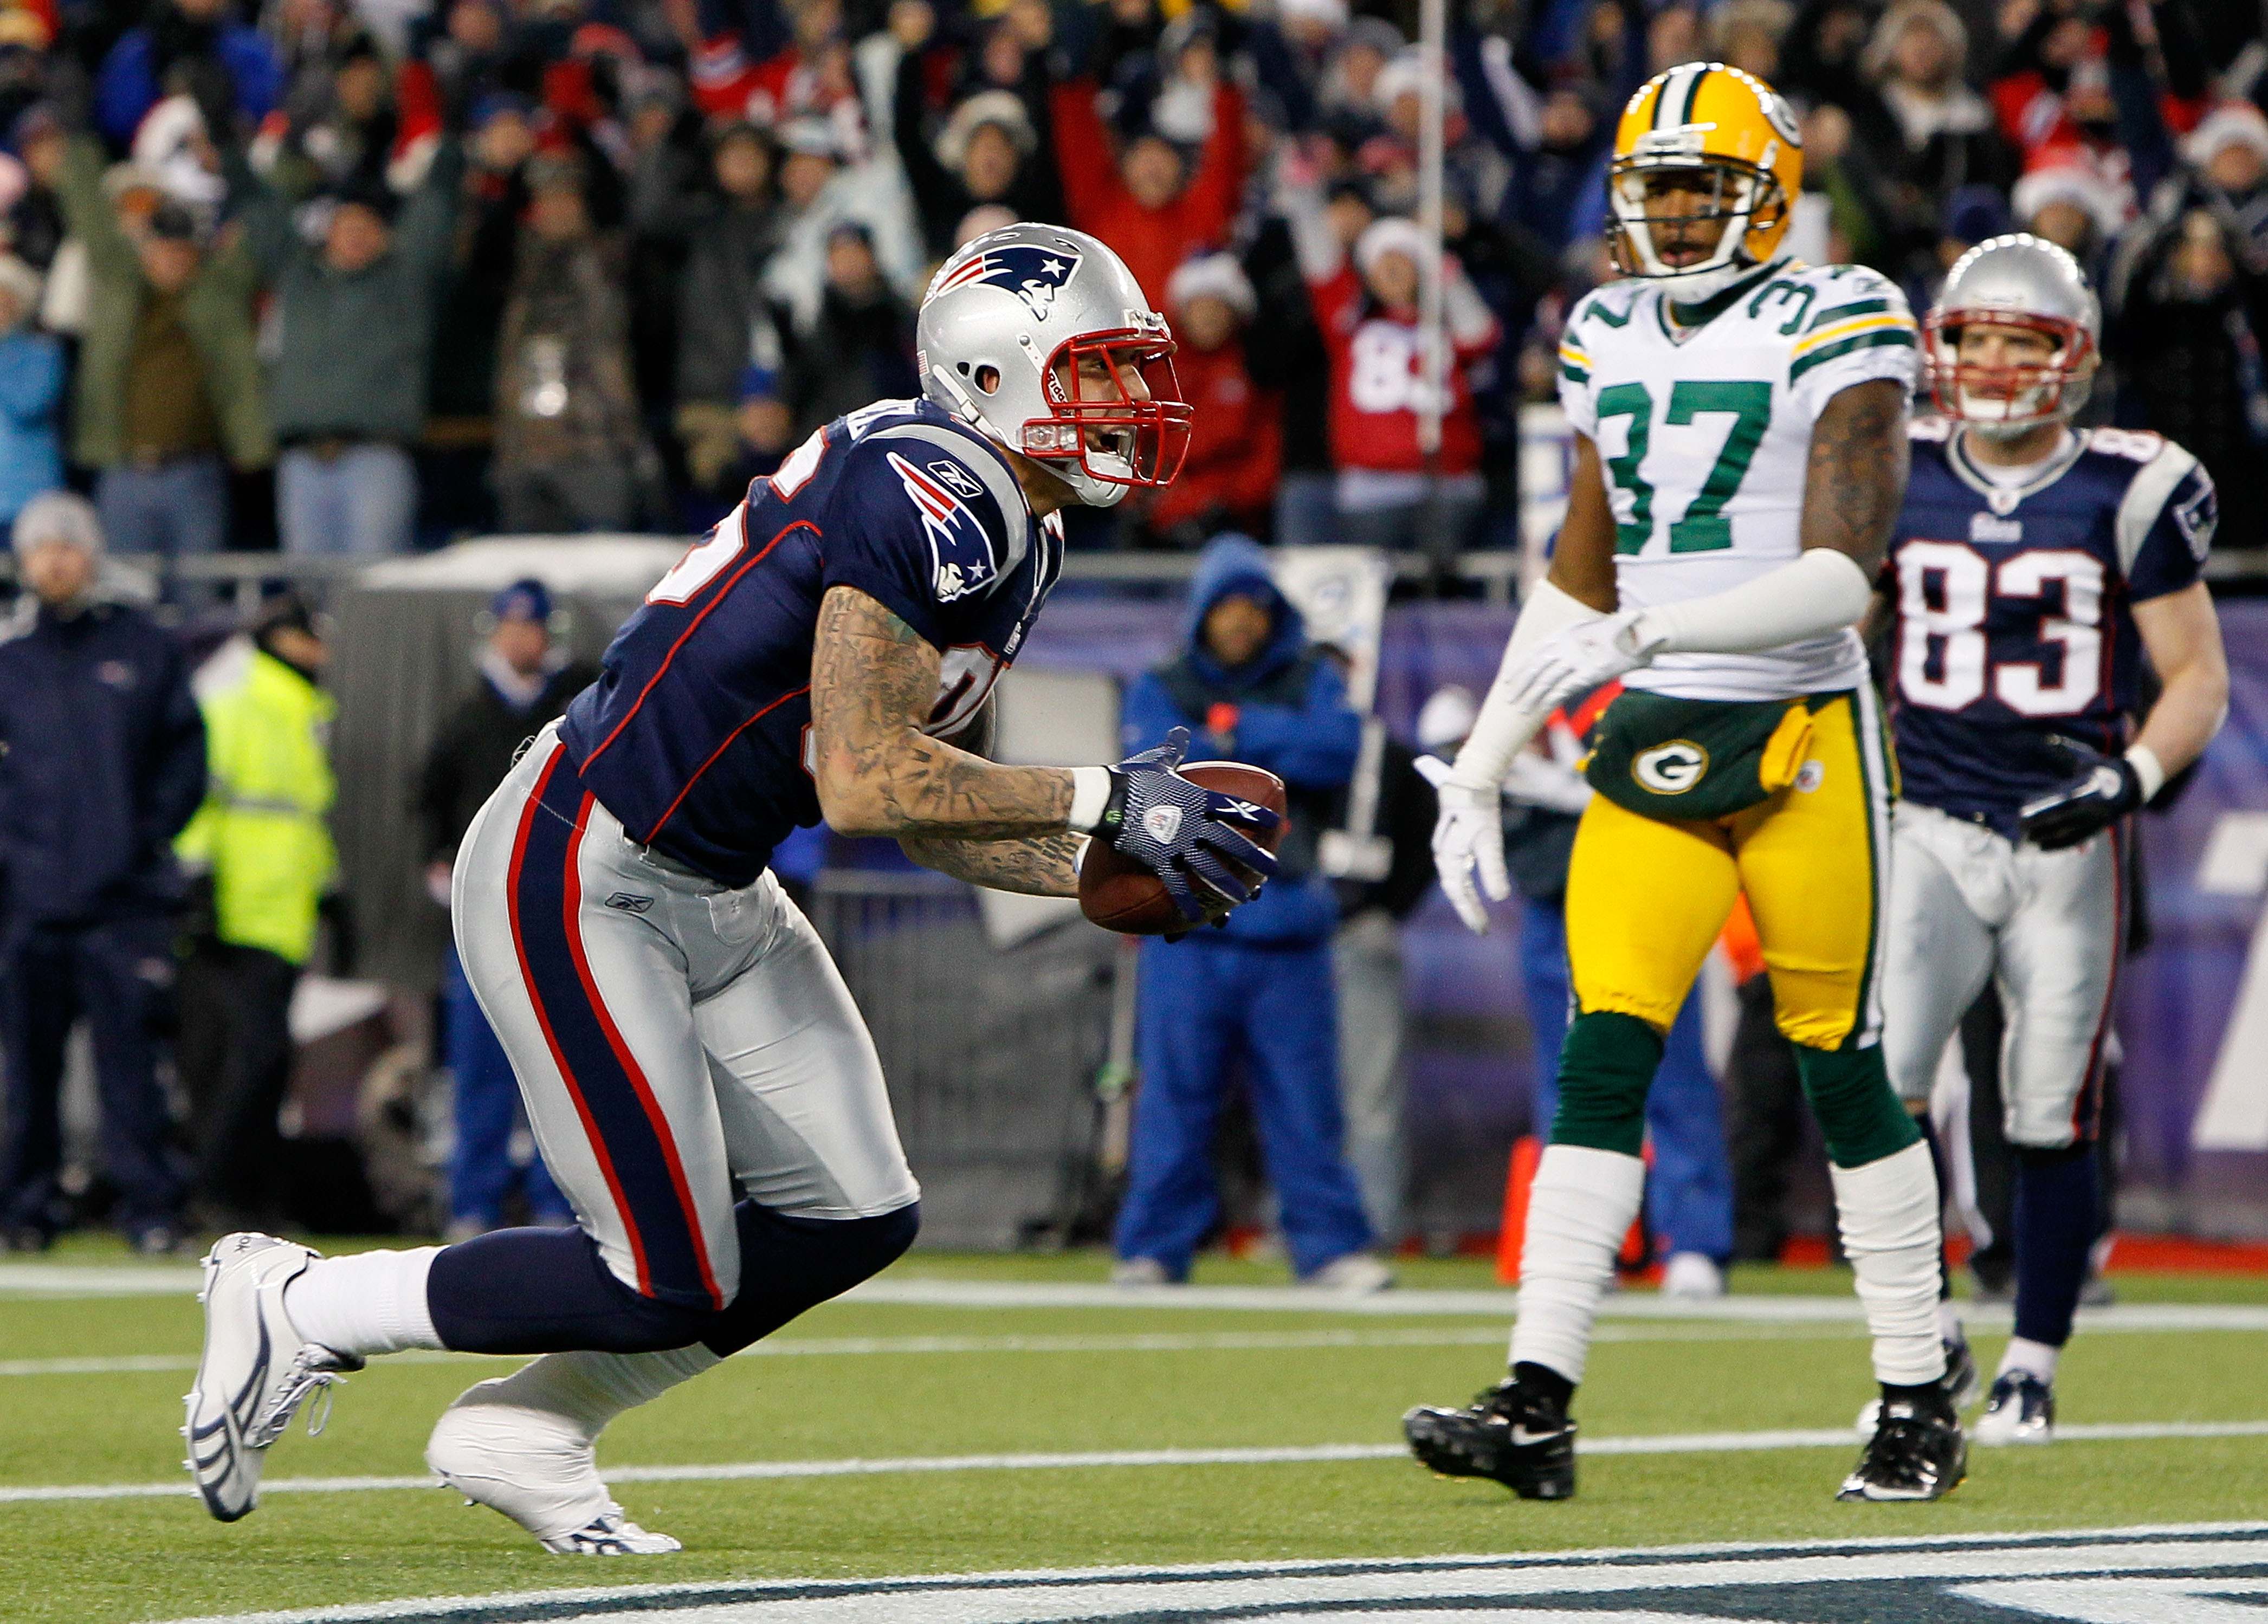 FOXBORO, MA - DECEMBER 19:  Tight end Aaron Hernandez #85 of the New England Patriots scores a touchdown against the Green Bay Packers during the second quarter of the game at Gillette Stadium on December 19, 2010 in Foxboro, Massachusetts.  (Photo by Jim